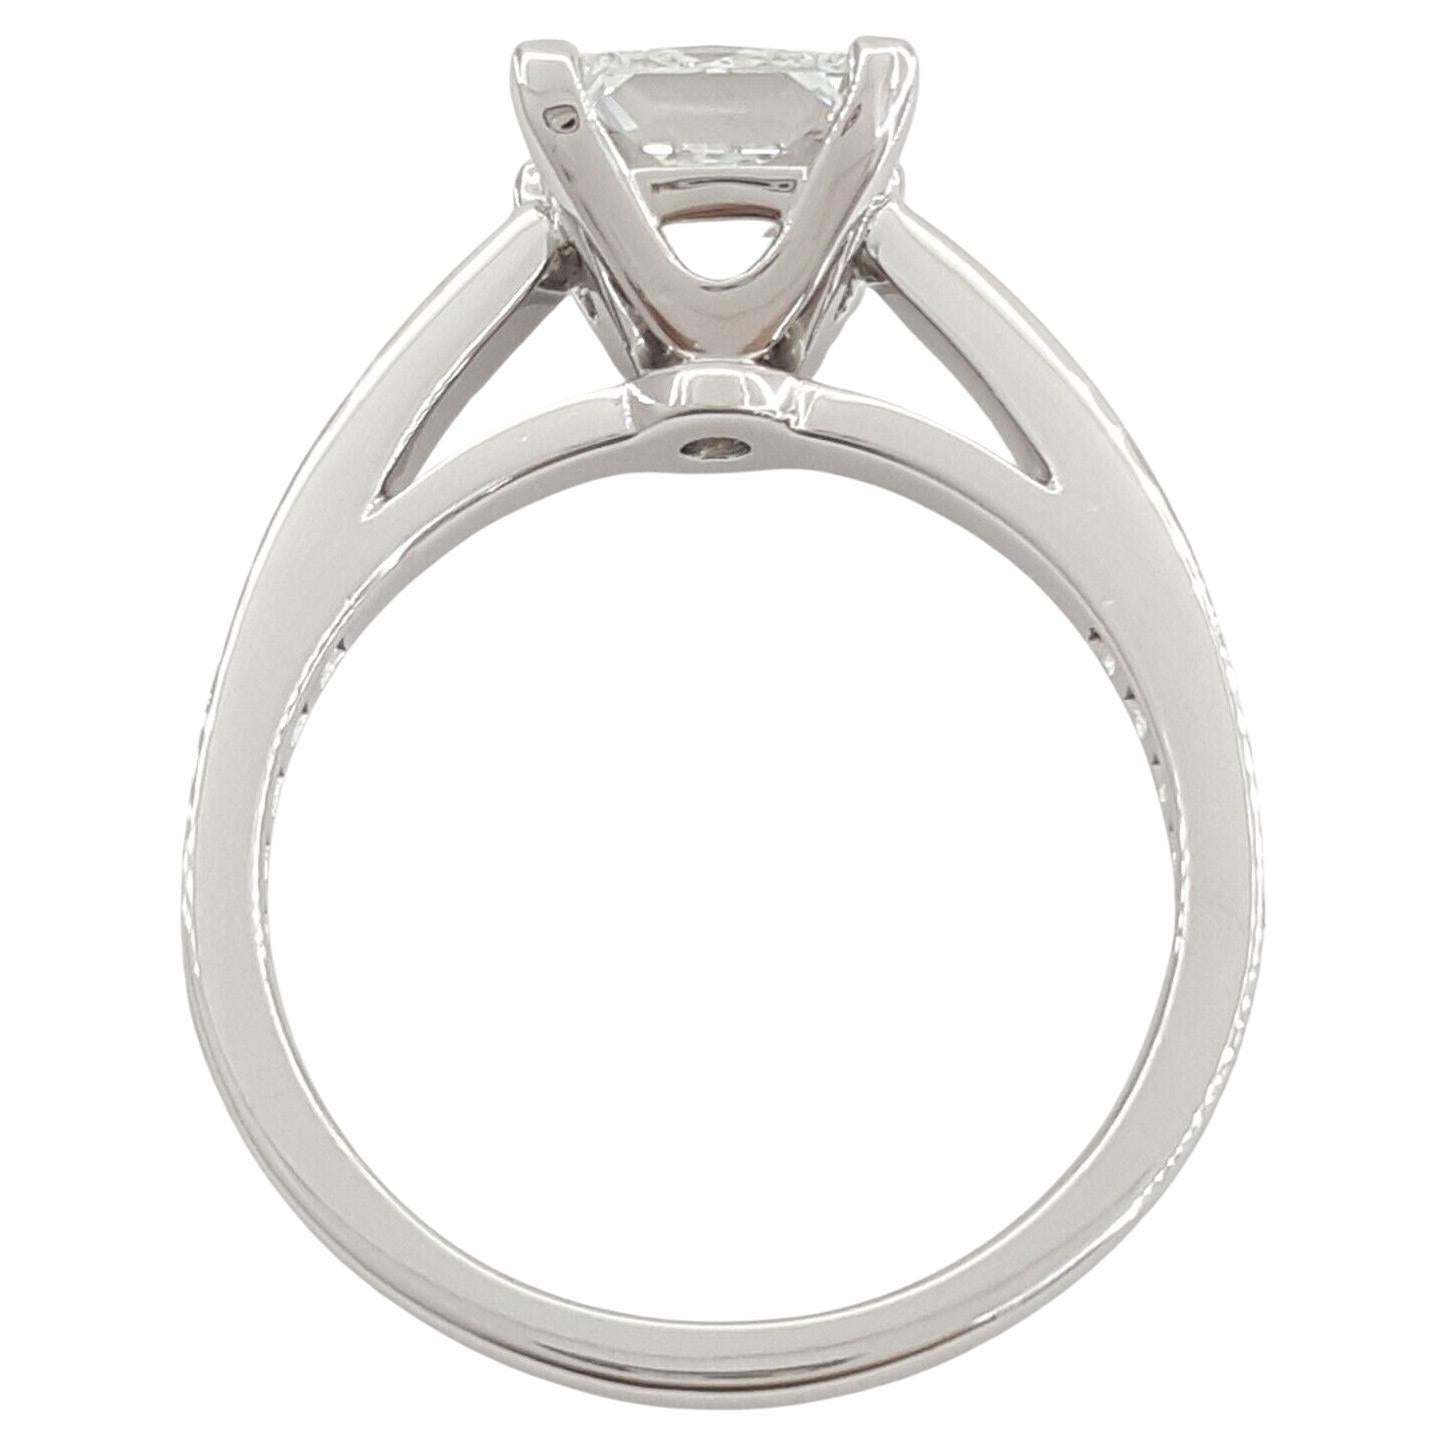 Tiffany & Co. presents the NOVO Platinum Princess Brilliant Cut Diamond Engagement Ring, featuring a 1.76 ct Princess Brilliant Cut Natural Diamond with specifications of F color, VS1 clarity, and excellent cut, polish, and very good symmetry. The